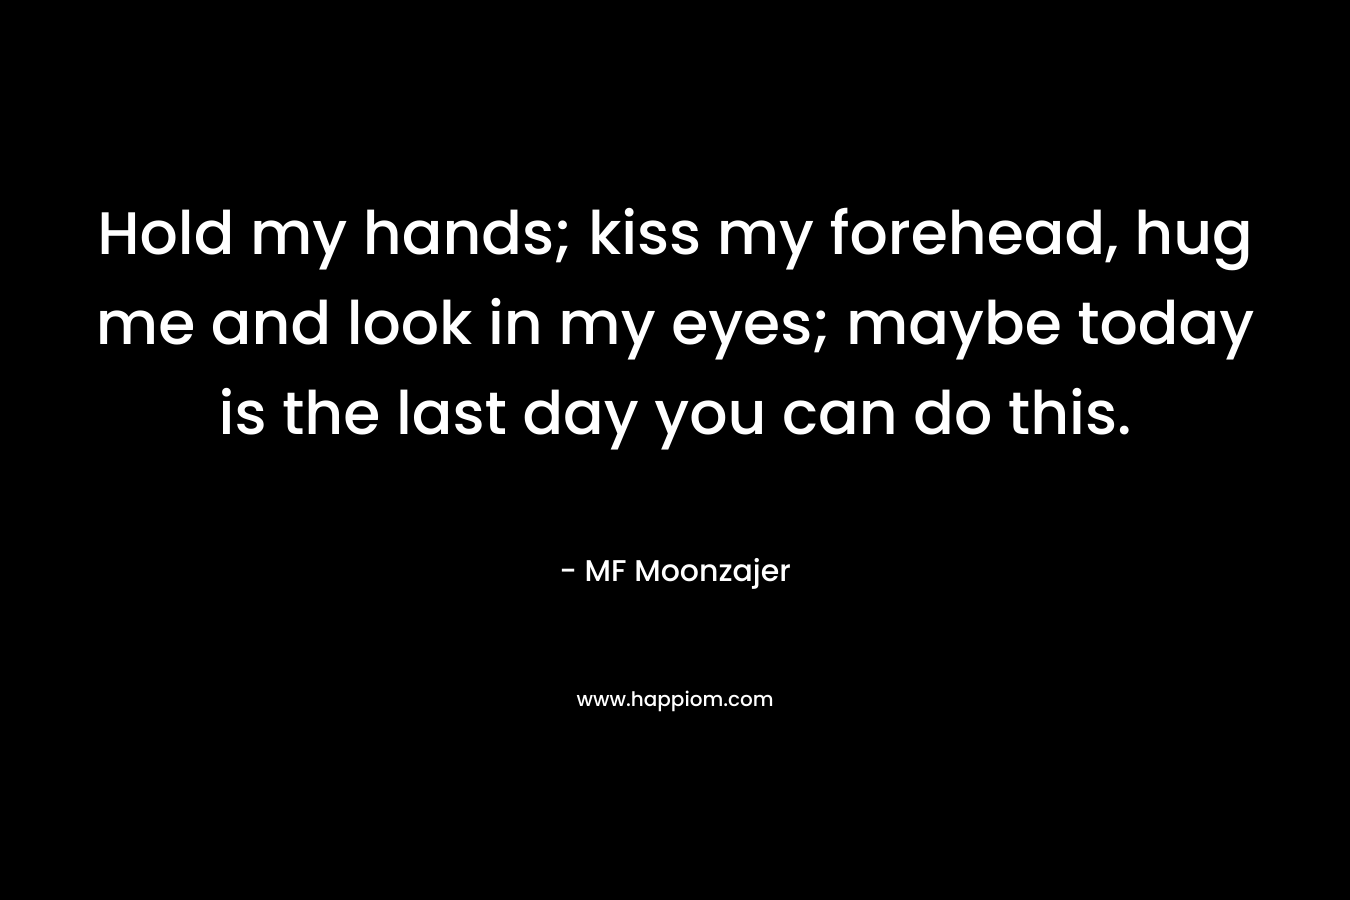 Hold my hands; kiss my forehead, hug me and look in my eyes; maybe today is the last day you can do this. – MF Moonzajer